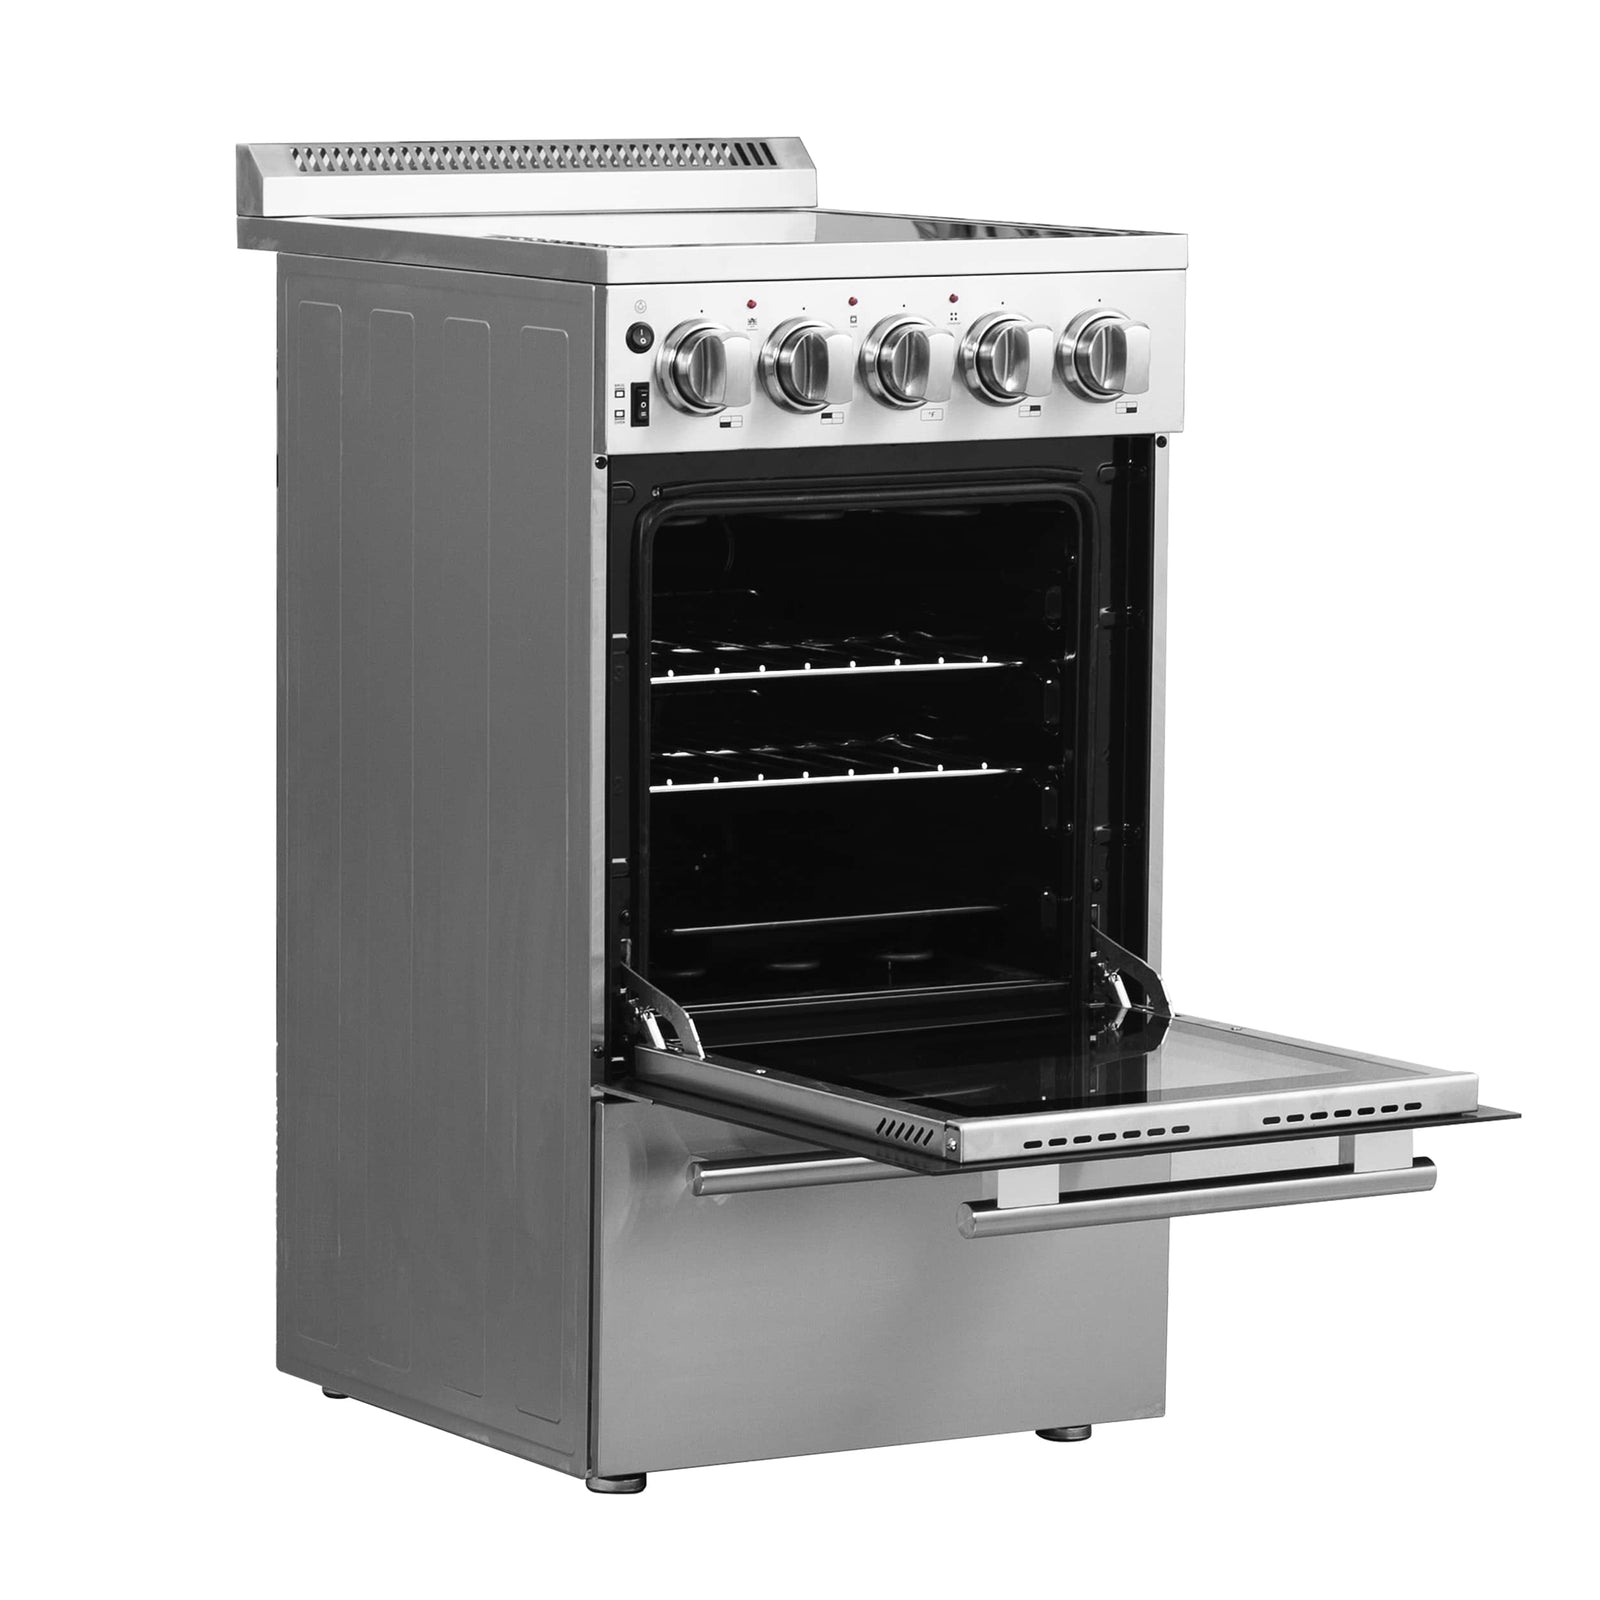 FORNO - 20-Inch Pallerano Electric Range with 4 Burners in Stainless Steel